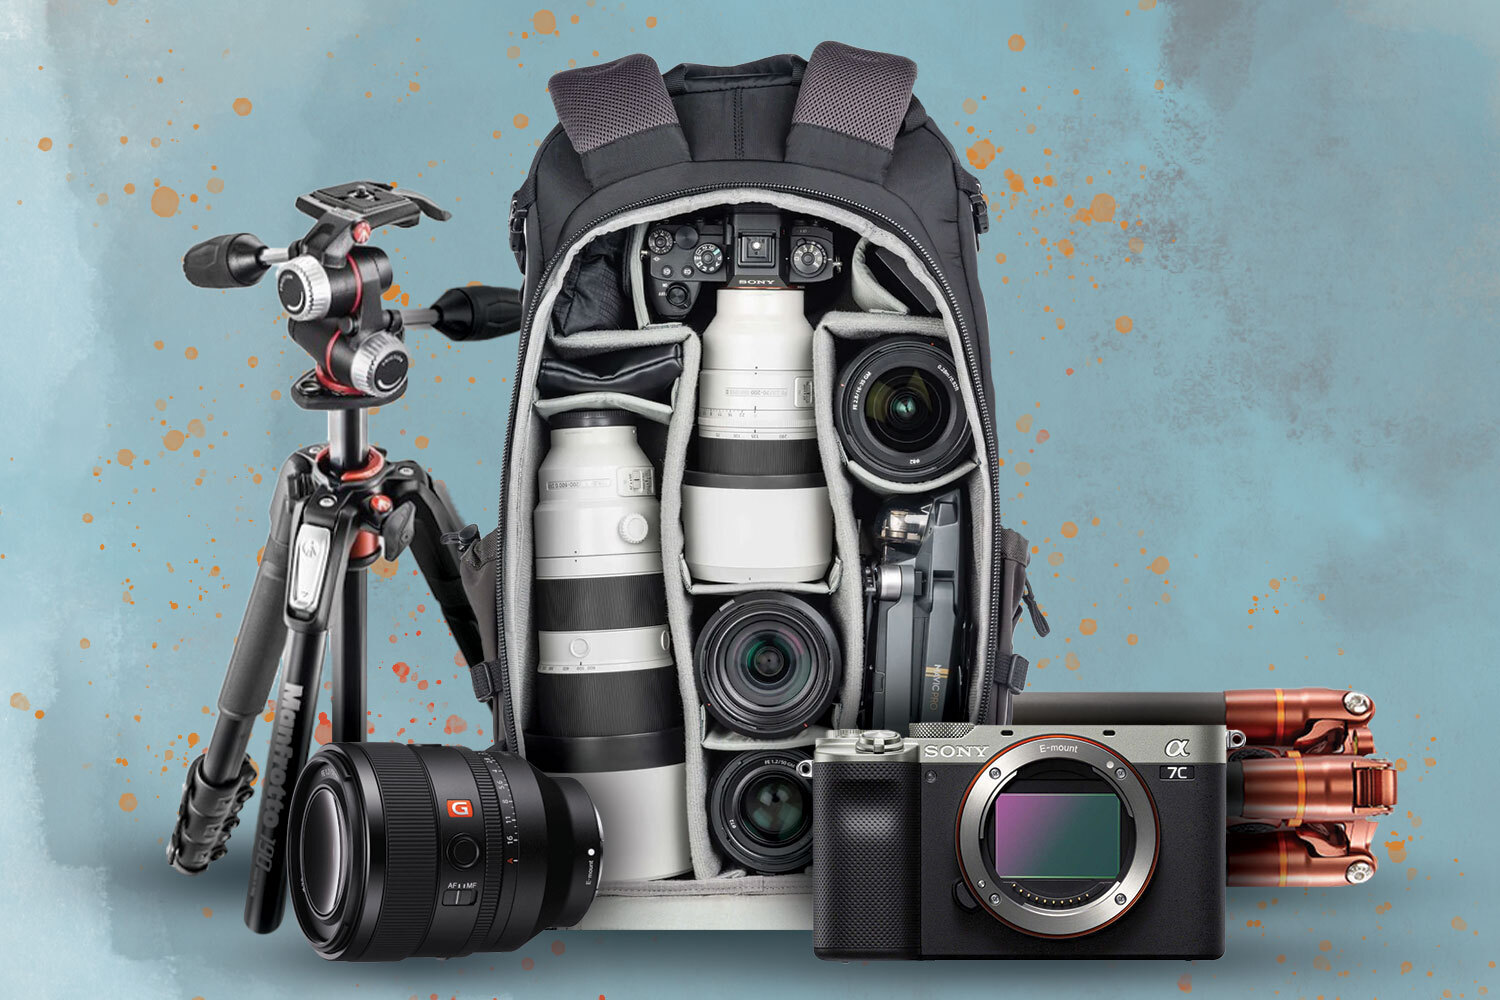 Everything in WaPo Photographer Craig Hudsons Gear picture